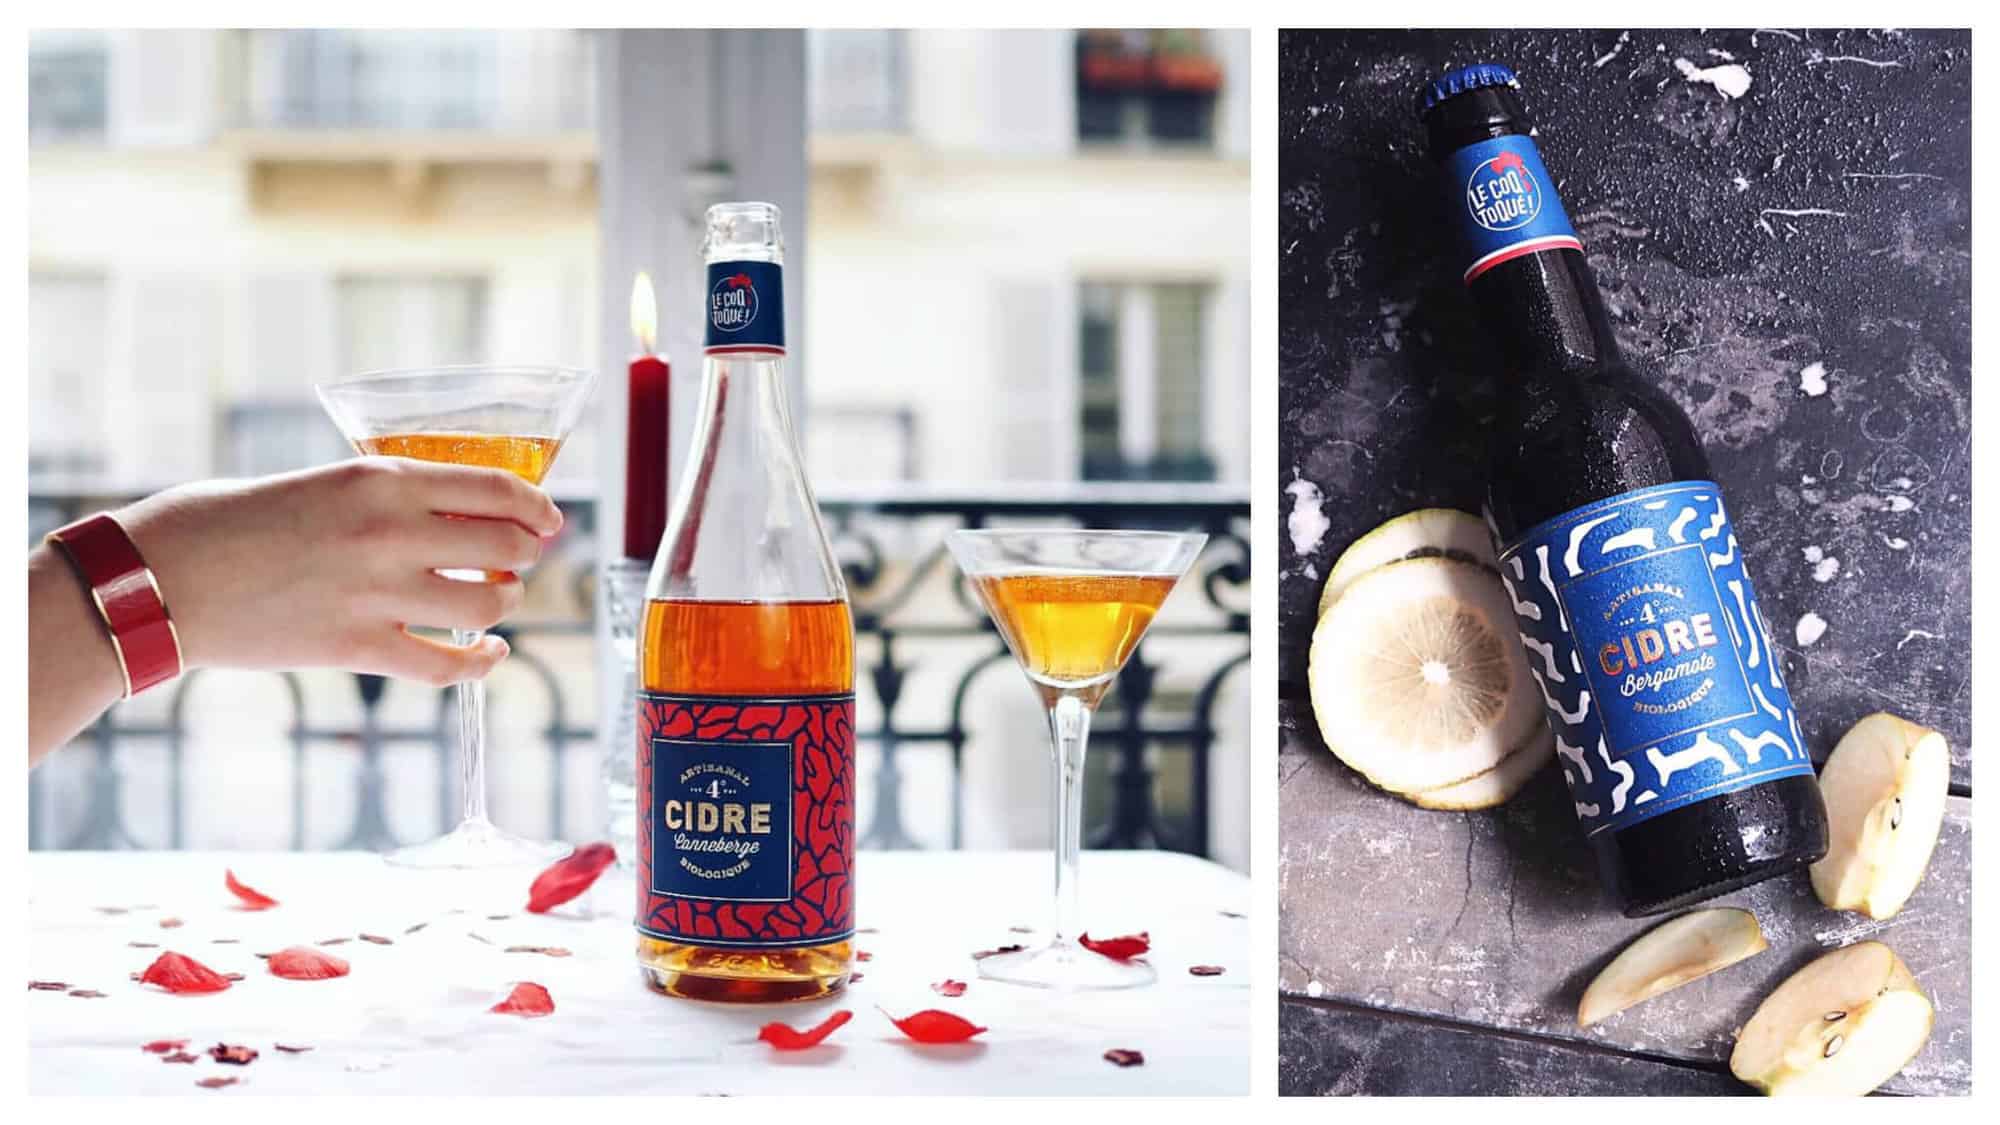 Left: two glasses of Le Coq Toque cider and the bottle on a table with rose petals and a lit candle in front of a Parisian window.
Right: a bottle of Le Coq Toque cider with slices of lemon and apple.